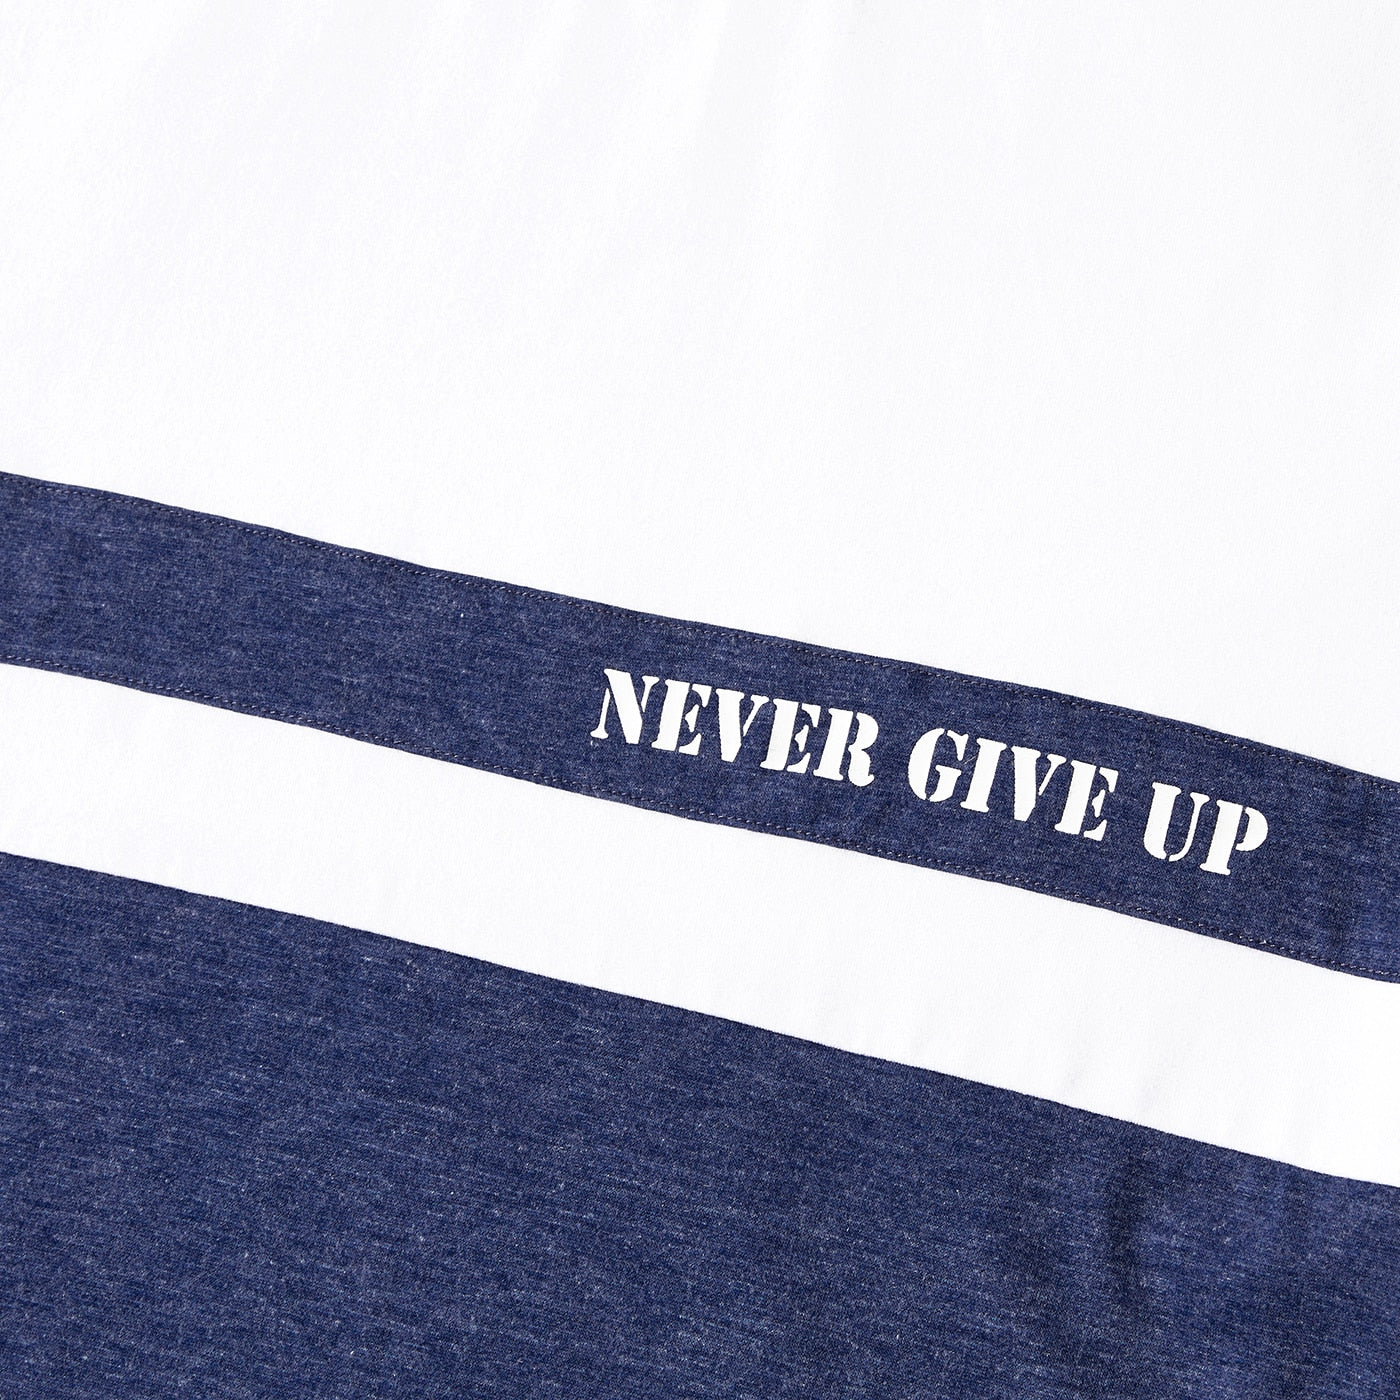 Family Matching! Twist Knit Sports Dresses and T-shirts "Never Give Up"